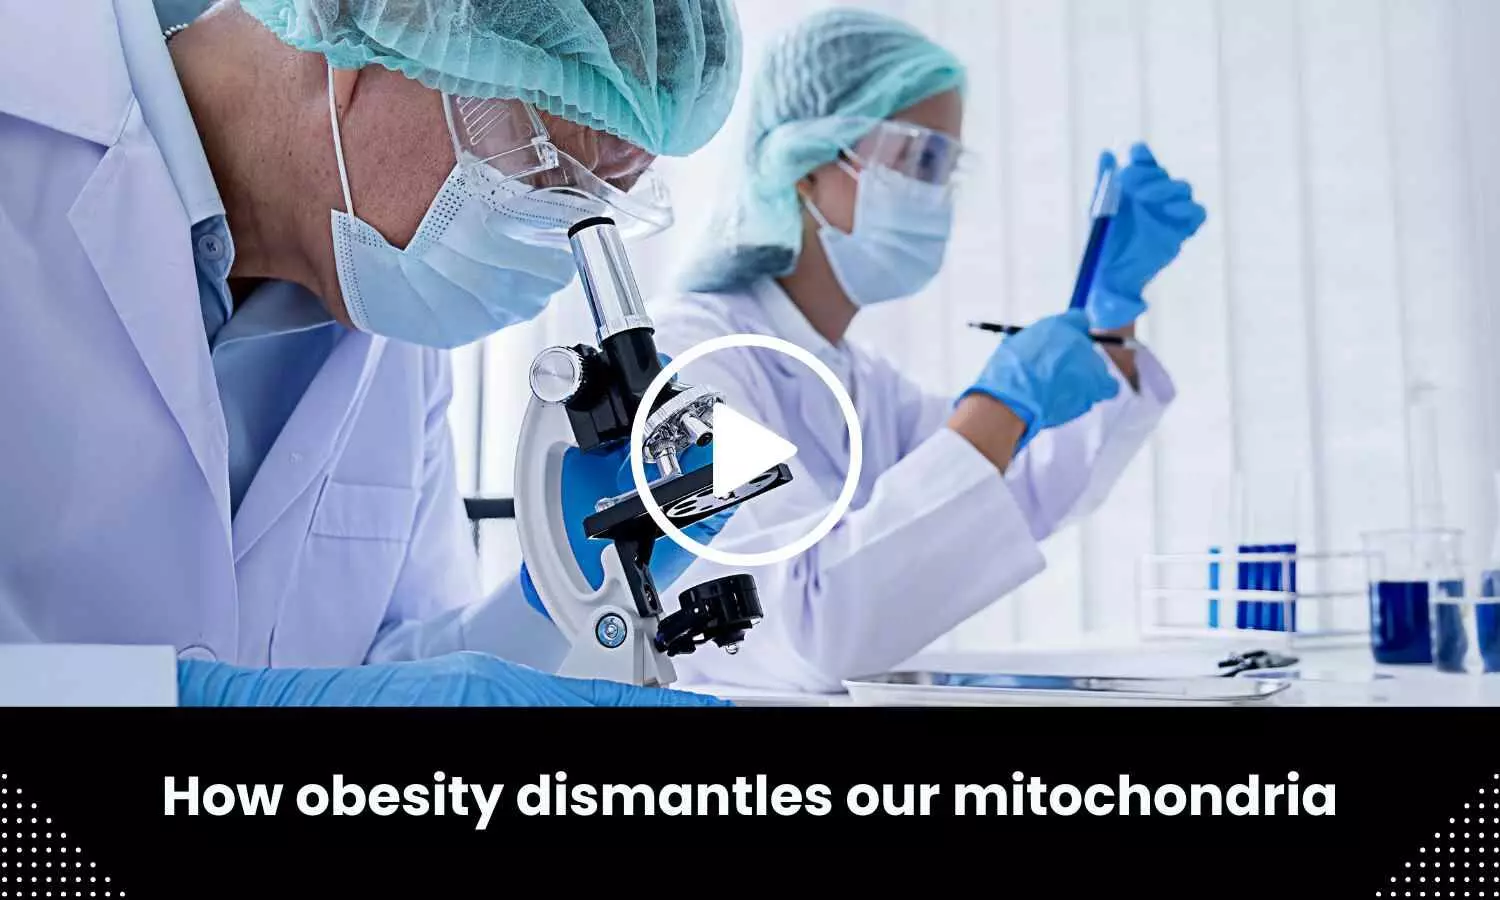 Obesity dismantles our mitochondria, here is the answer